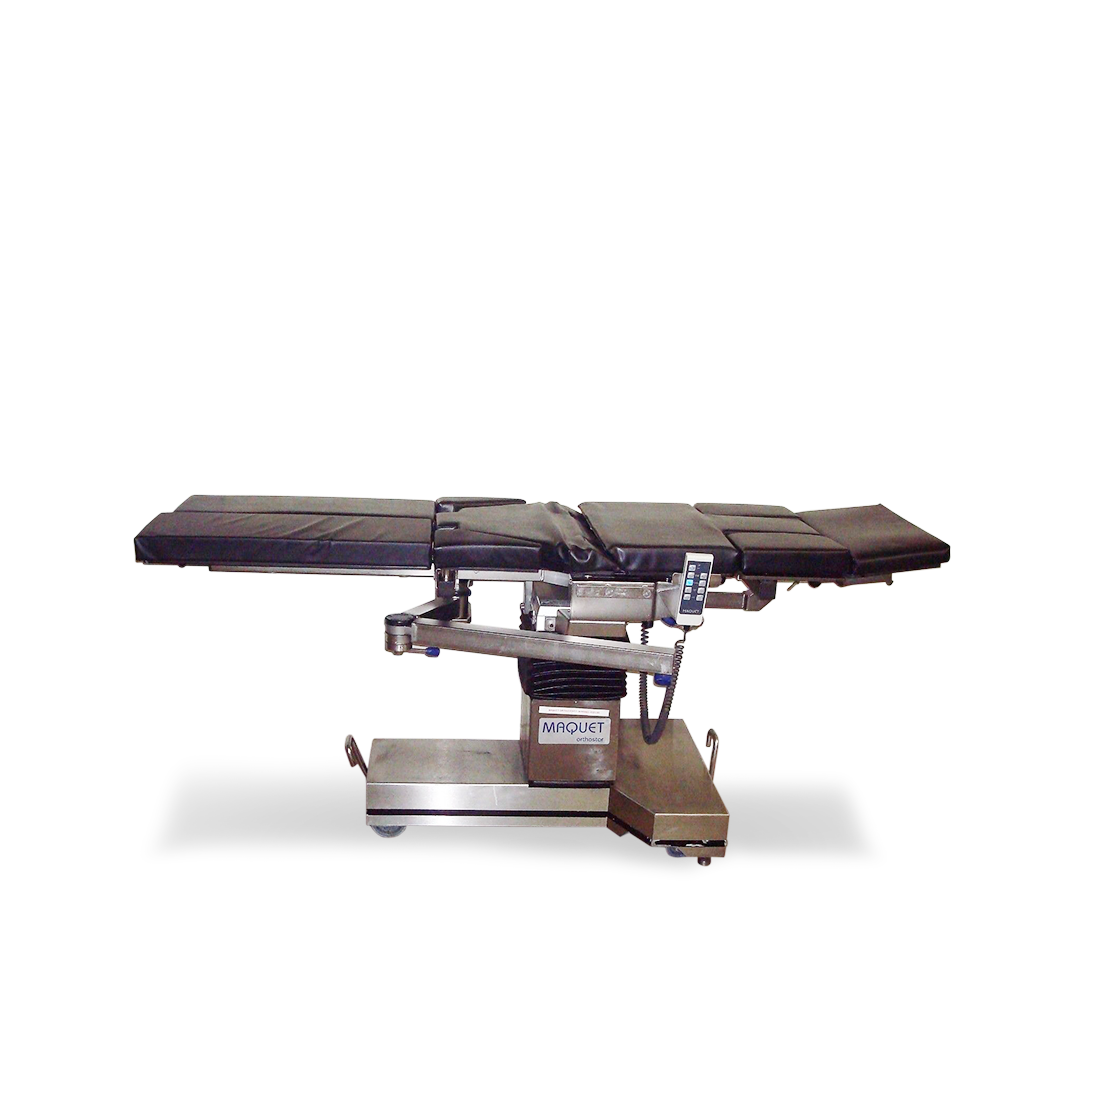 Maquet 1425 Orthopedic Surgical Table